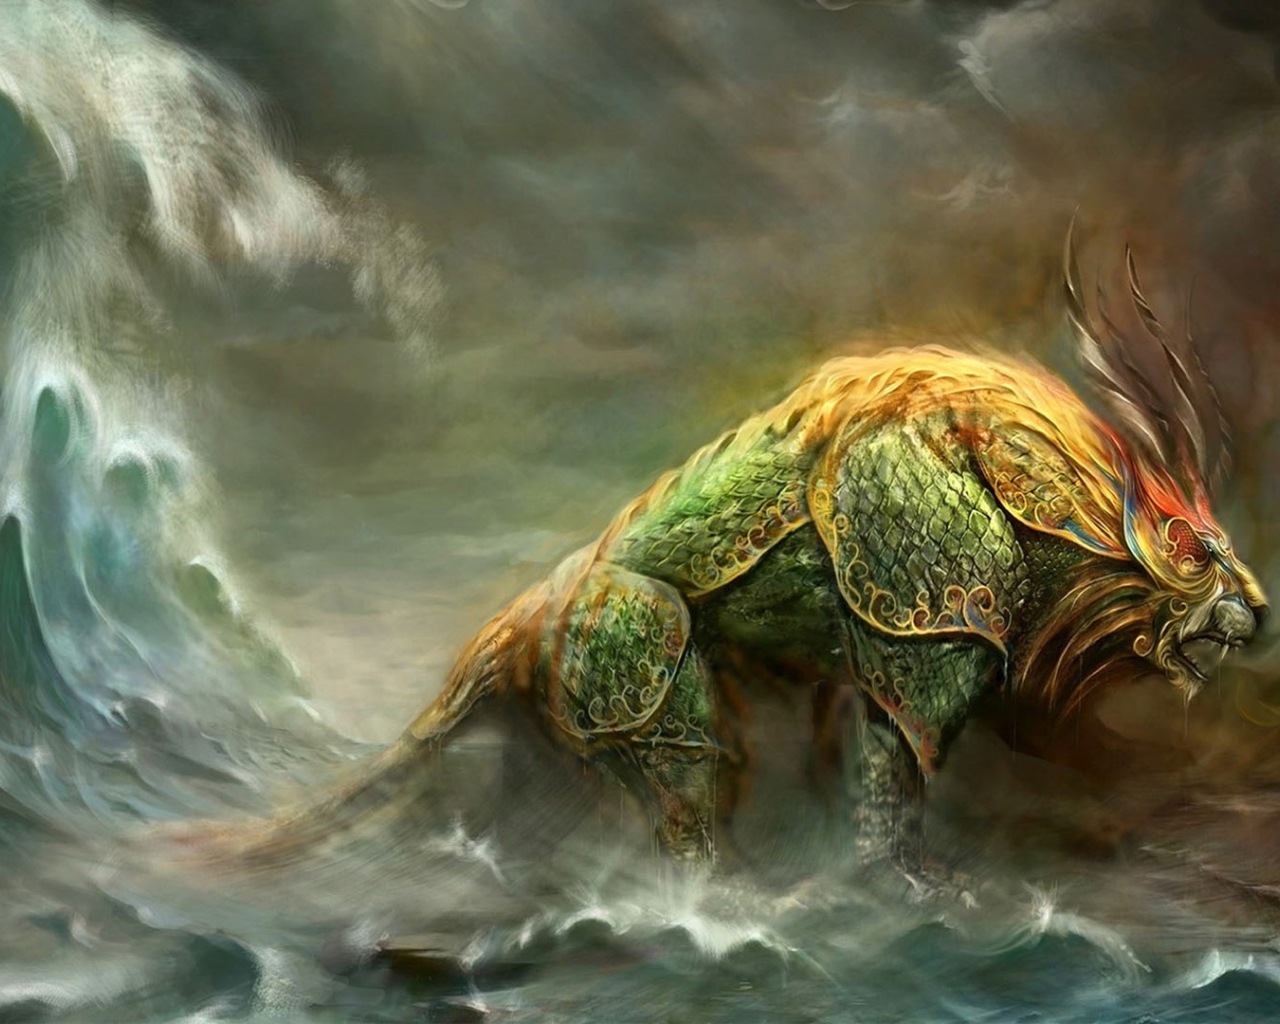 Fantasy Monster out of the water